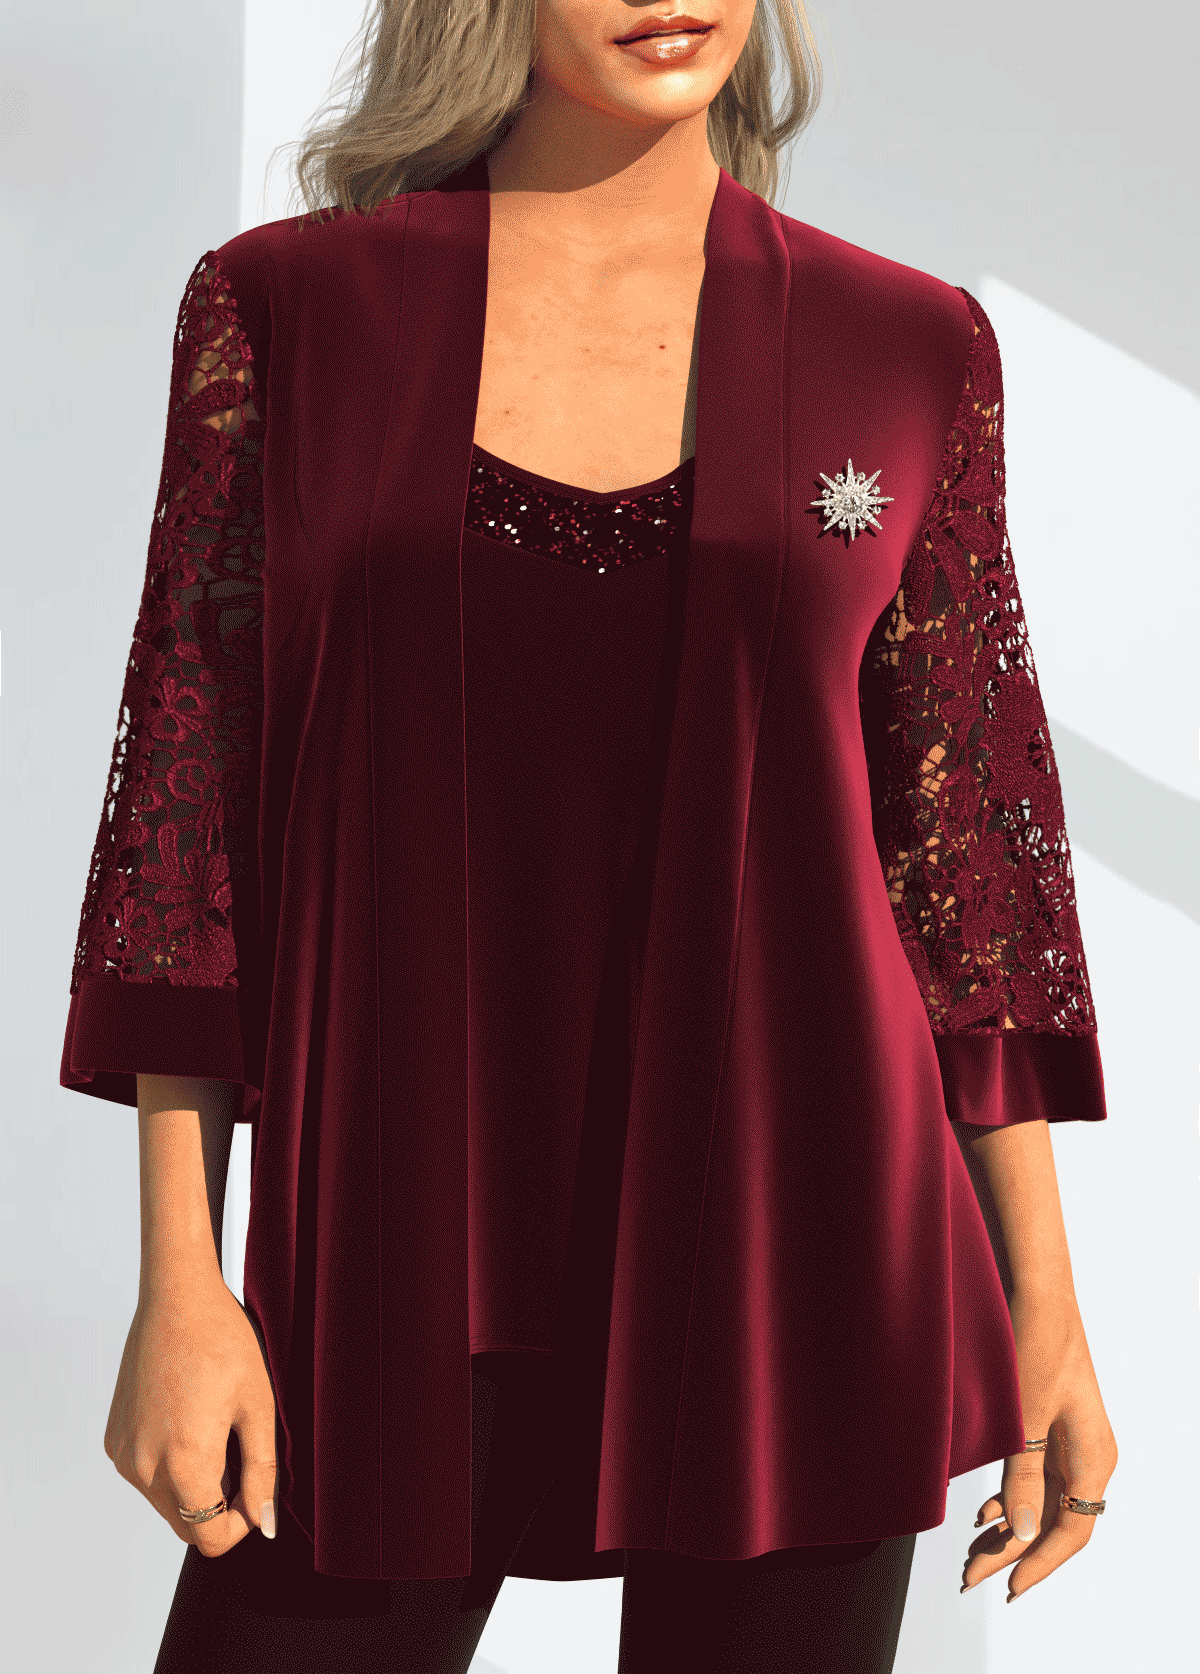 Lace Stitching 3/4 Sleeve Red Coat and Camisole Top